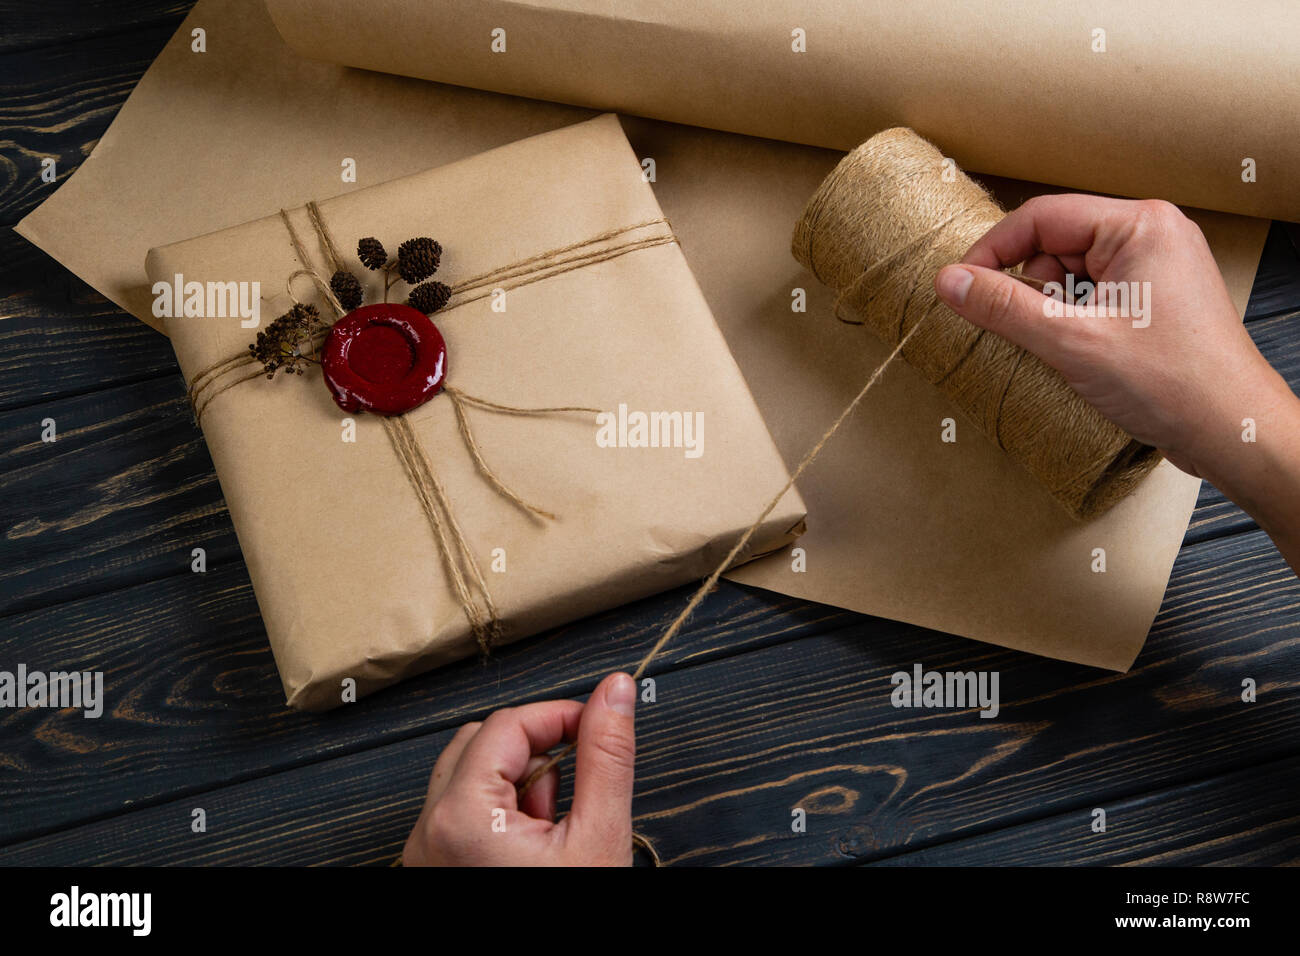 Process of package gift wrapped in craft paper with string and ...